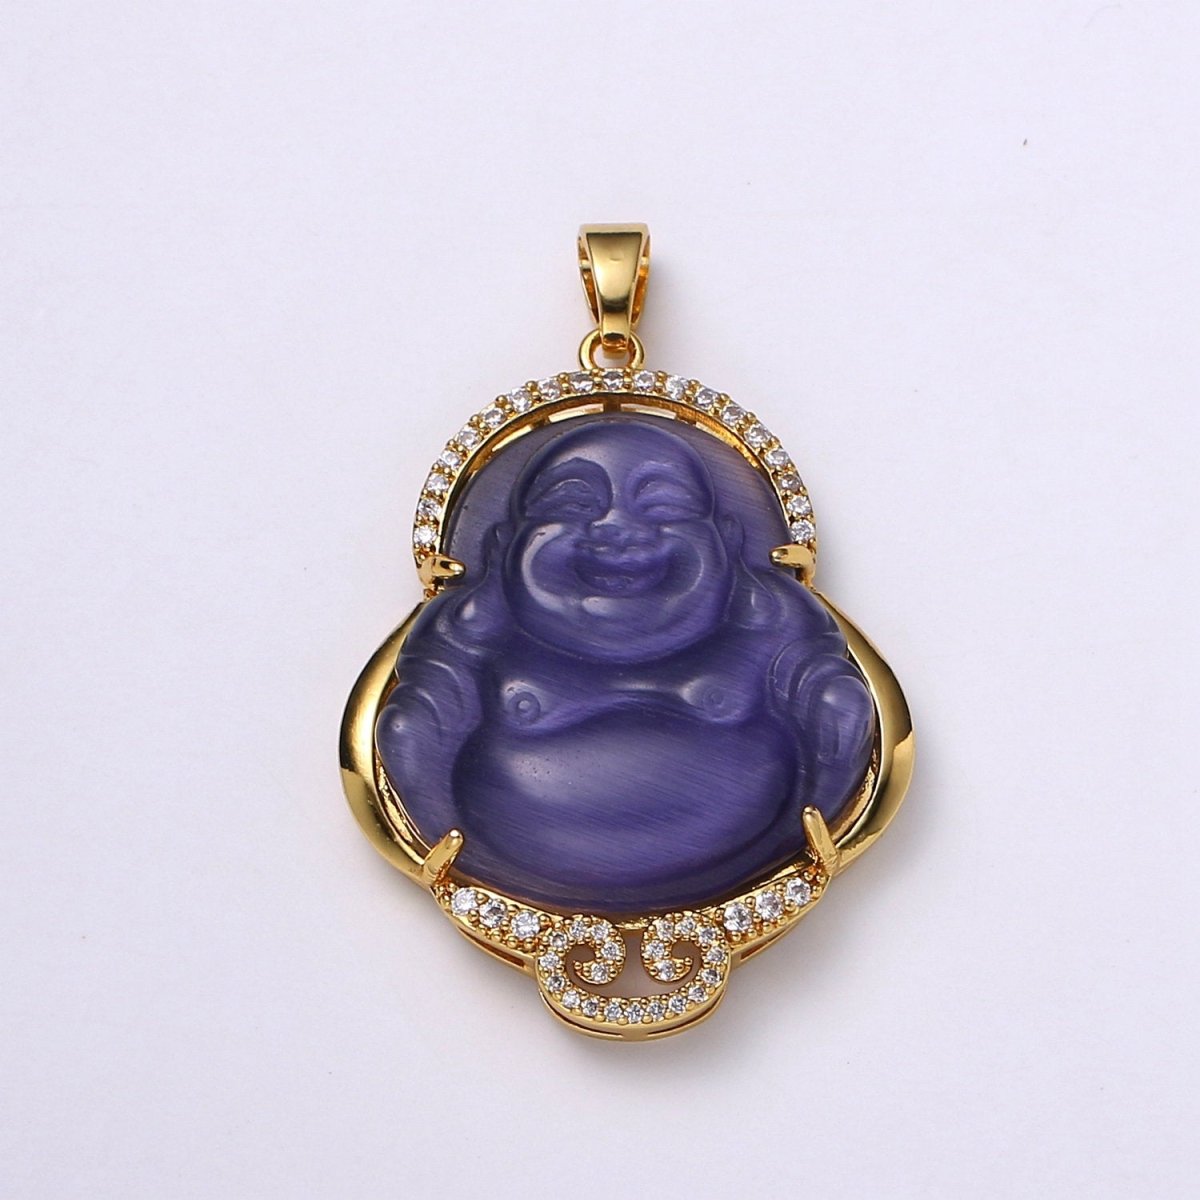 Micro Pave Buddha 24k Gold Filled Buddha Pendant Gold Buddha Charm for Necklace Laughing Buddha for Religious Jewelry Making Supply Trend O-138 ~ O-146 - DLUXCA